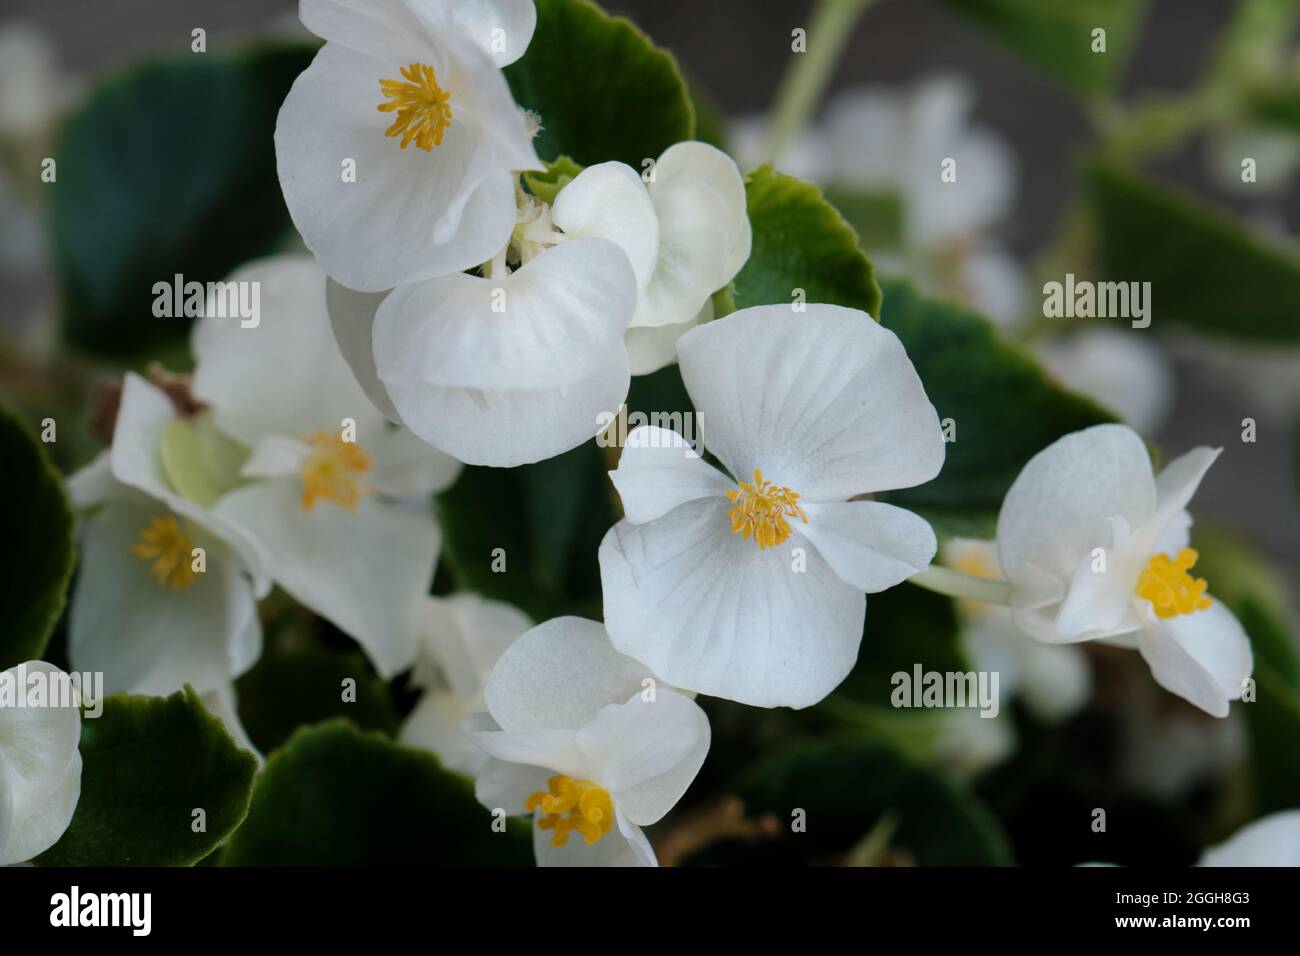 Begonia cucullata known as wax begonia white blooming flowers Stock Photo